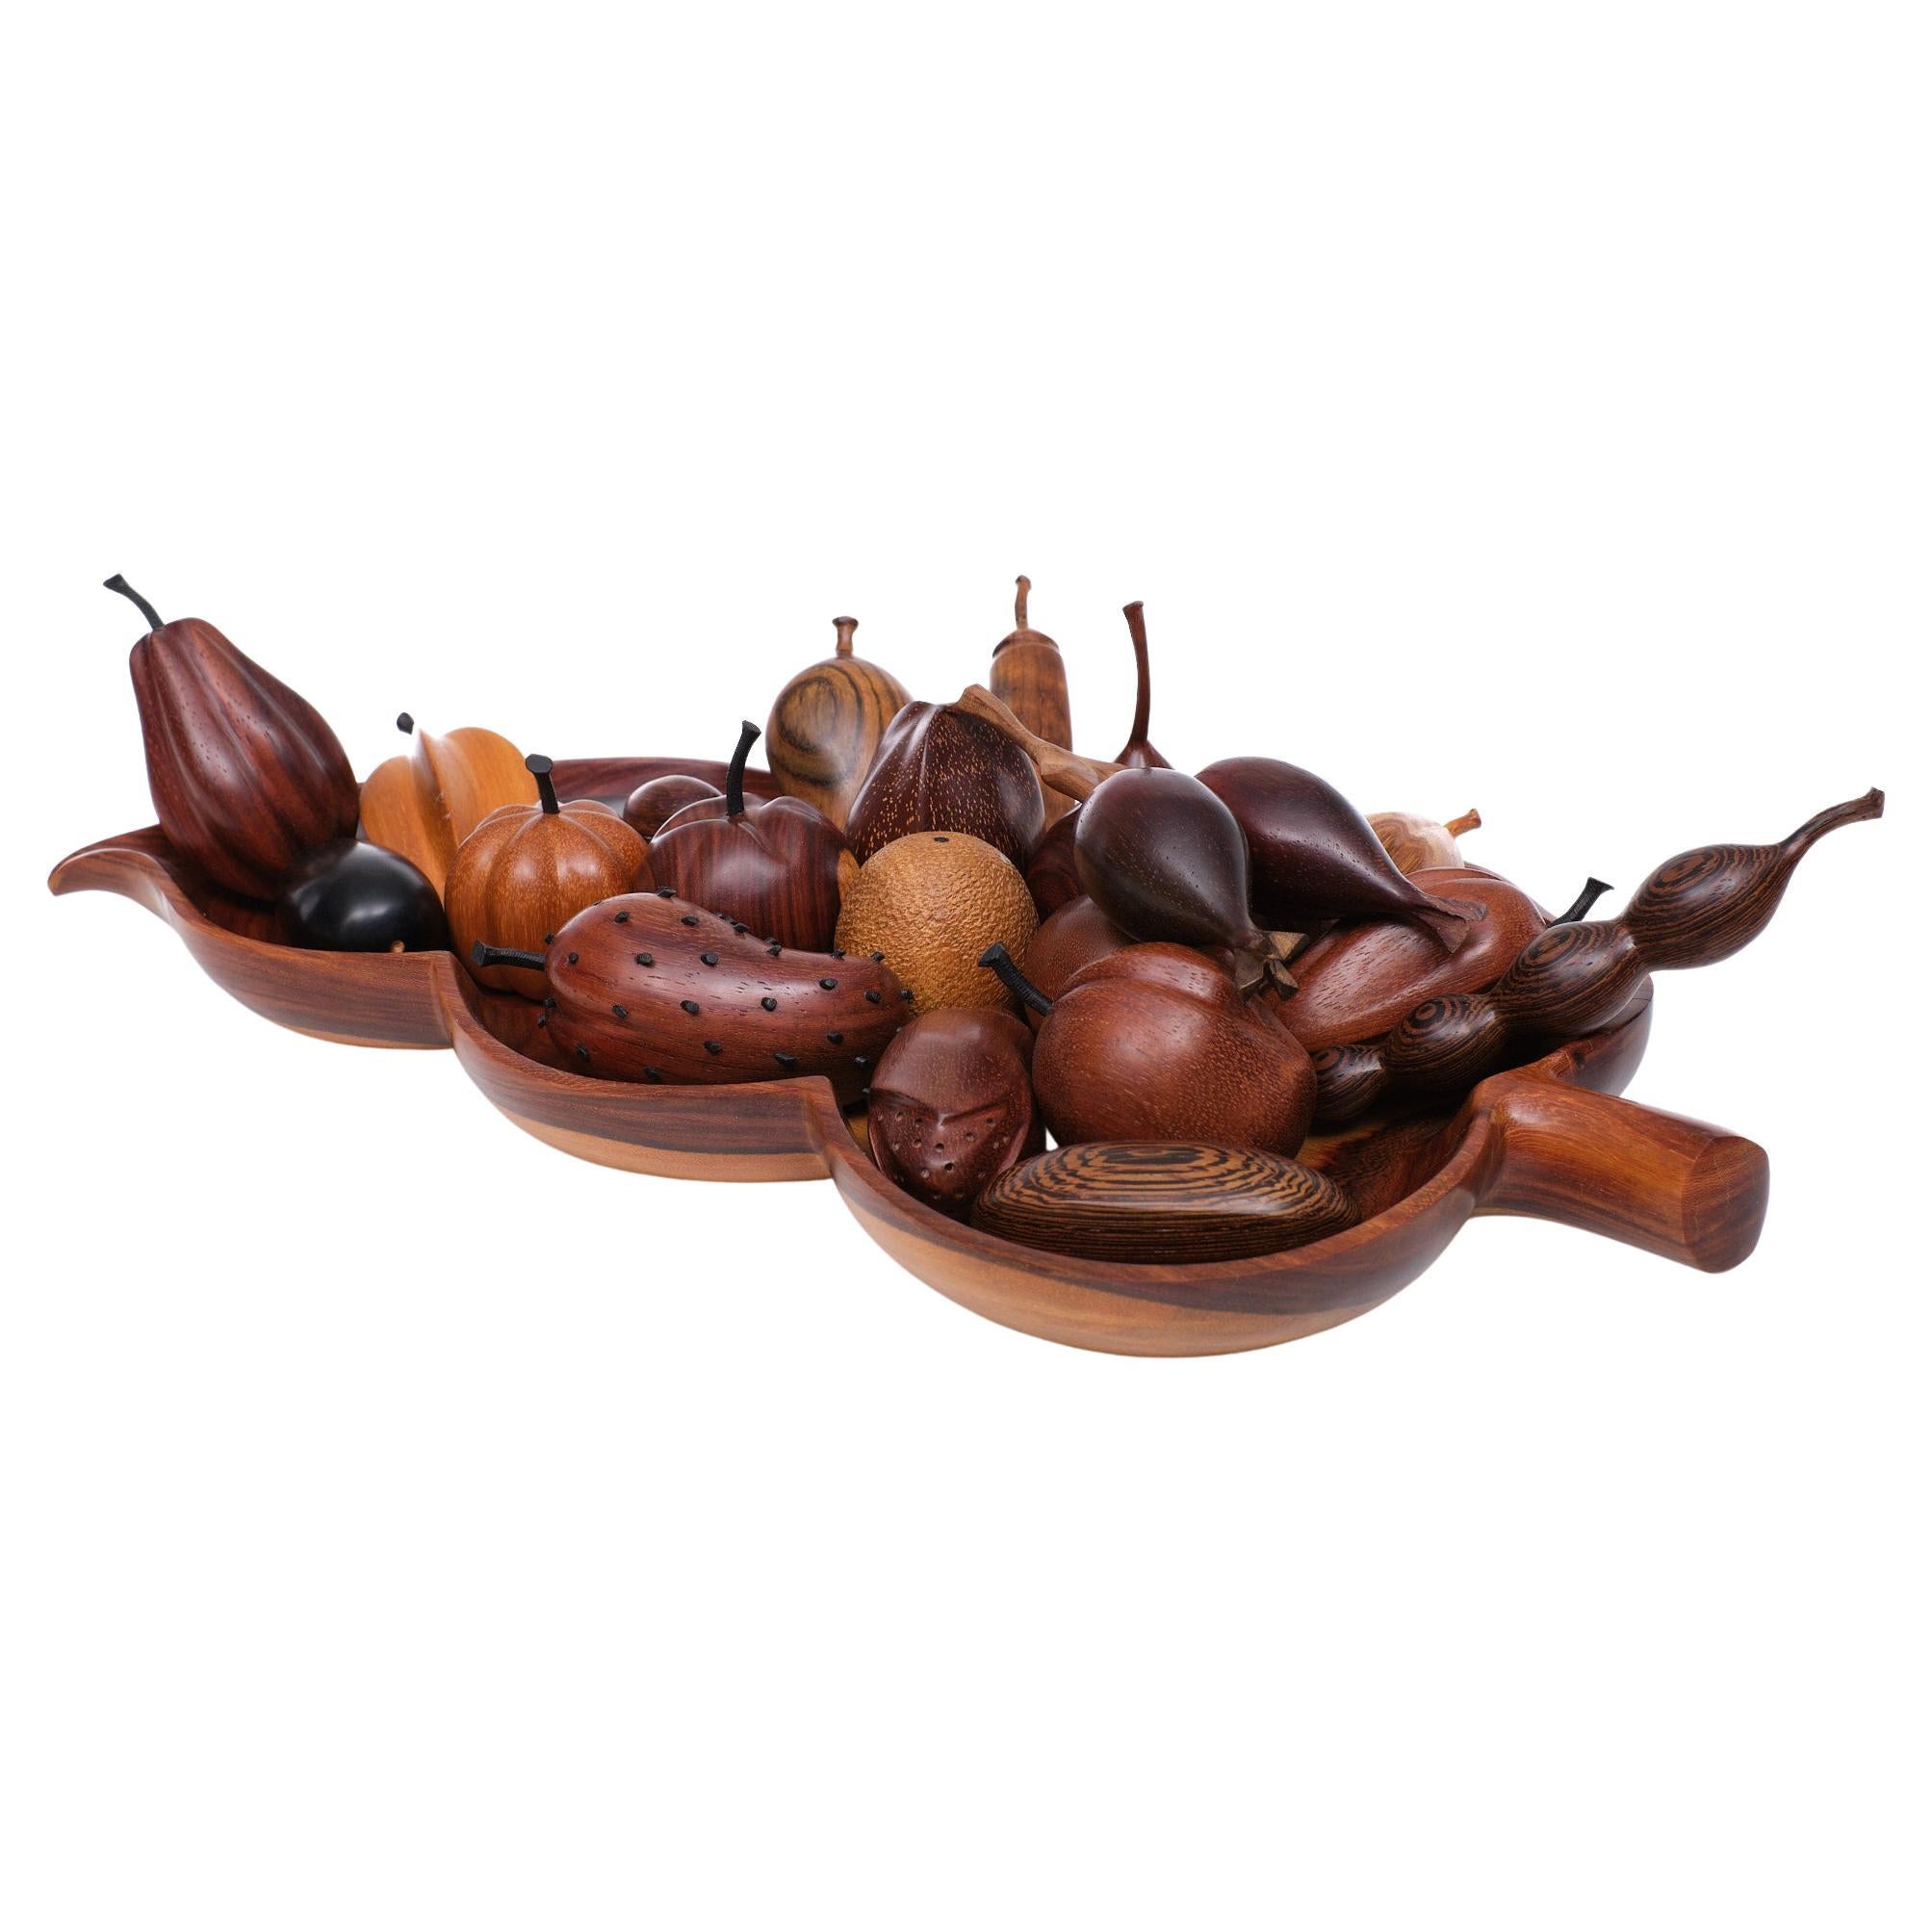 Fantastic fruit basket. All kind off beautiful hand carved tropical fruit.
In all kind off different woods. All together in a Teak wood bowl.
Very good quality. Great looking set.